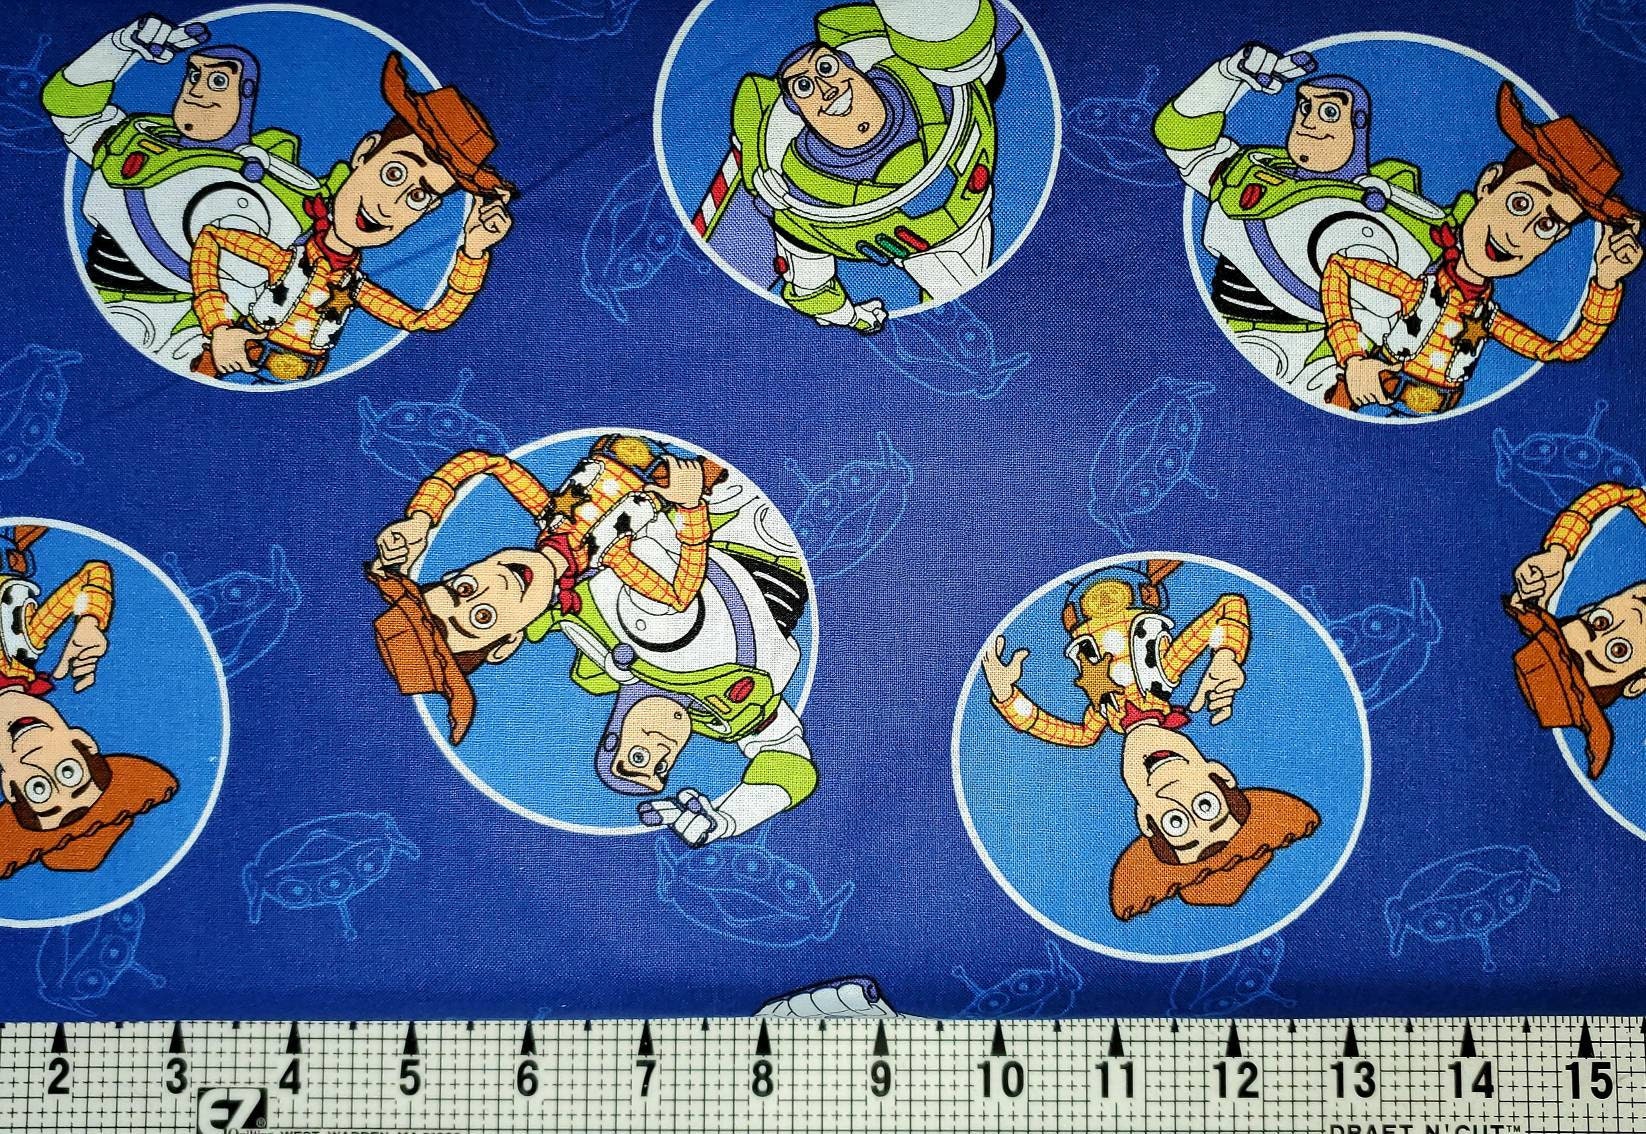 Toy Story 4 Fabric by the Yard | Etsy